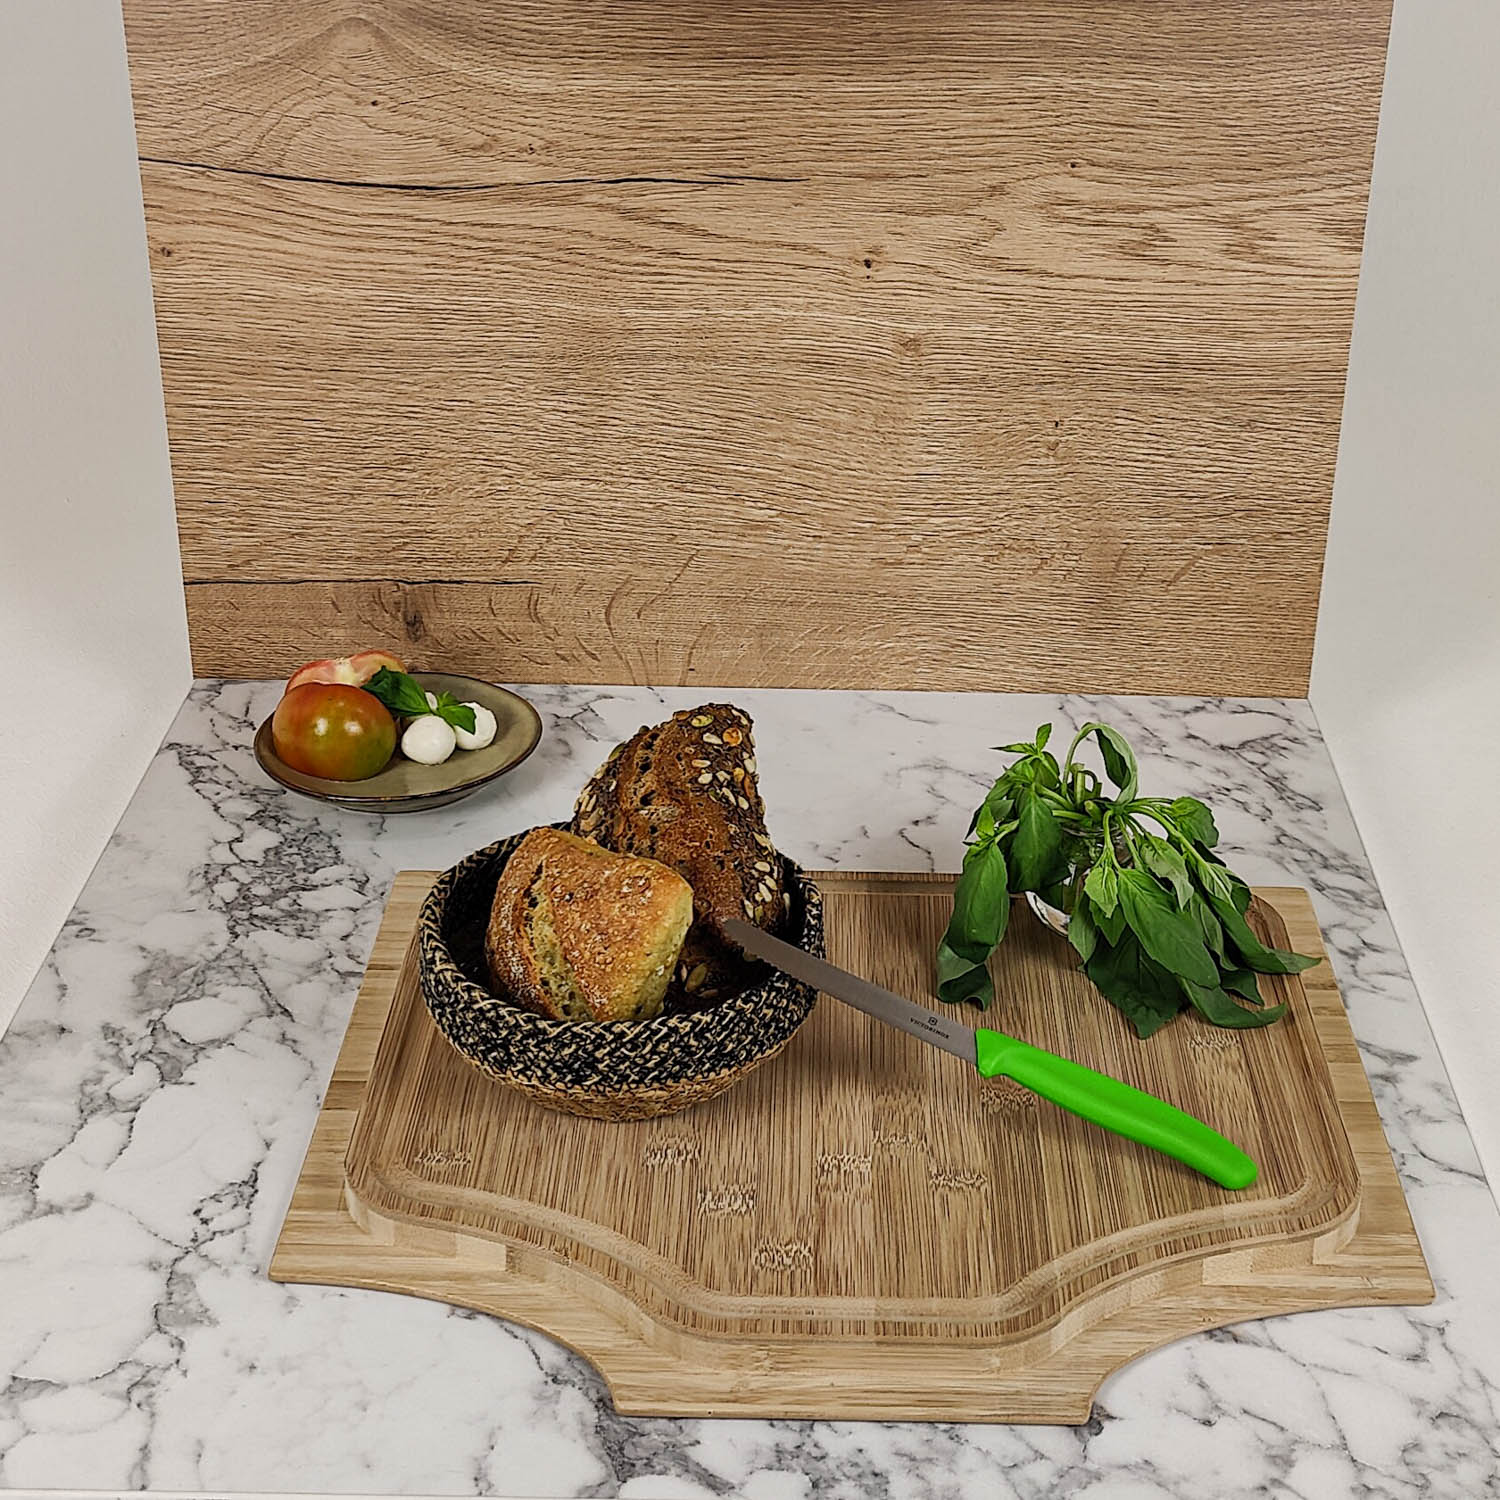 Cutting board with sink cover for Frankia models